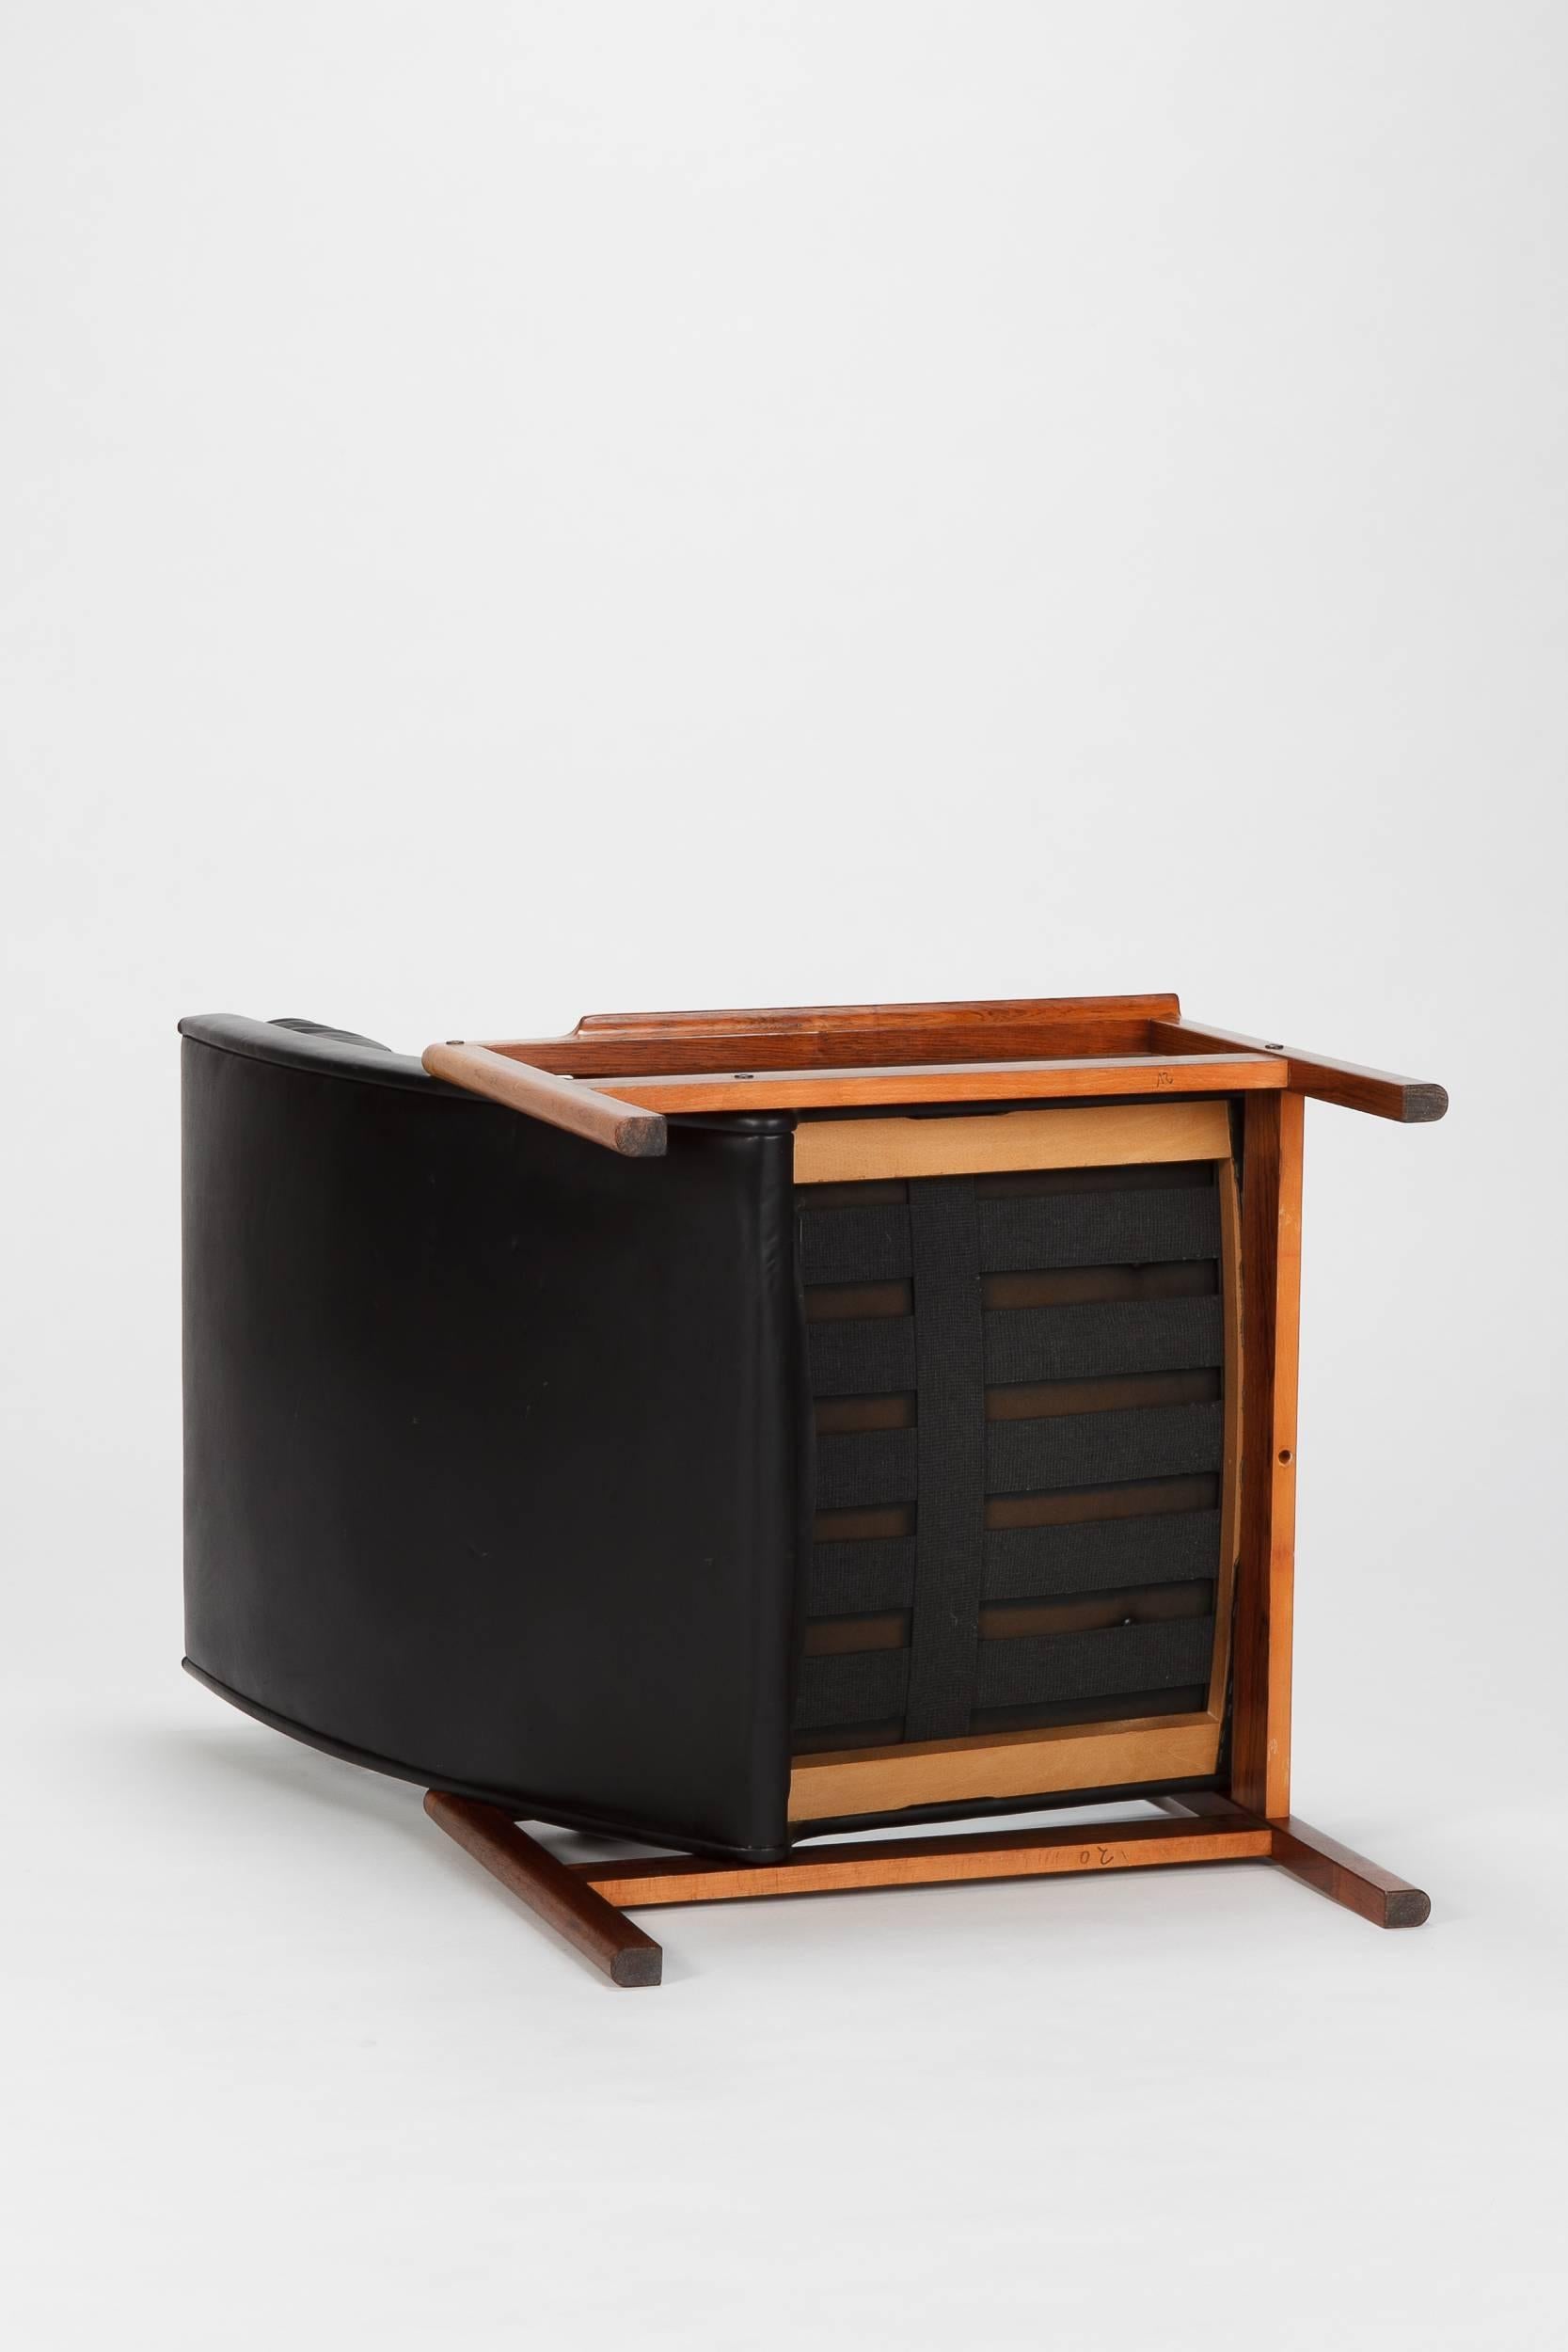 Leather Rosewood High Back Lounge Chair Attributed to Frederick Kayser, 1960s